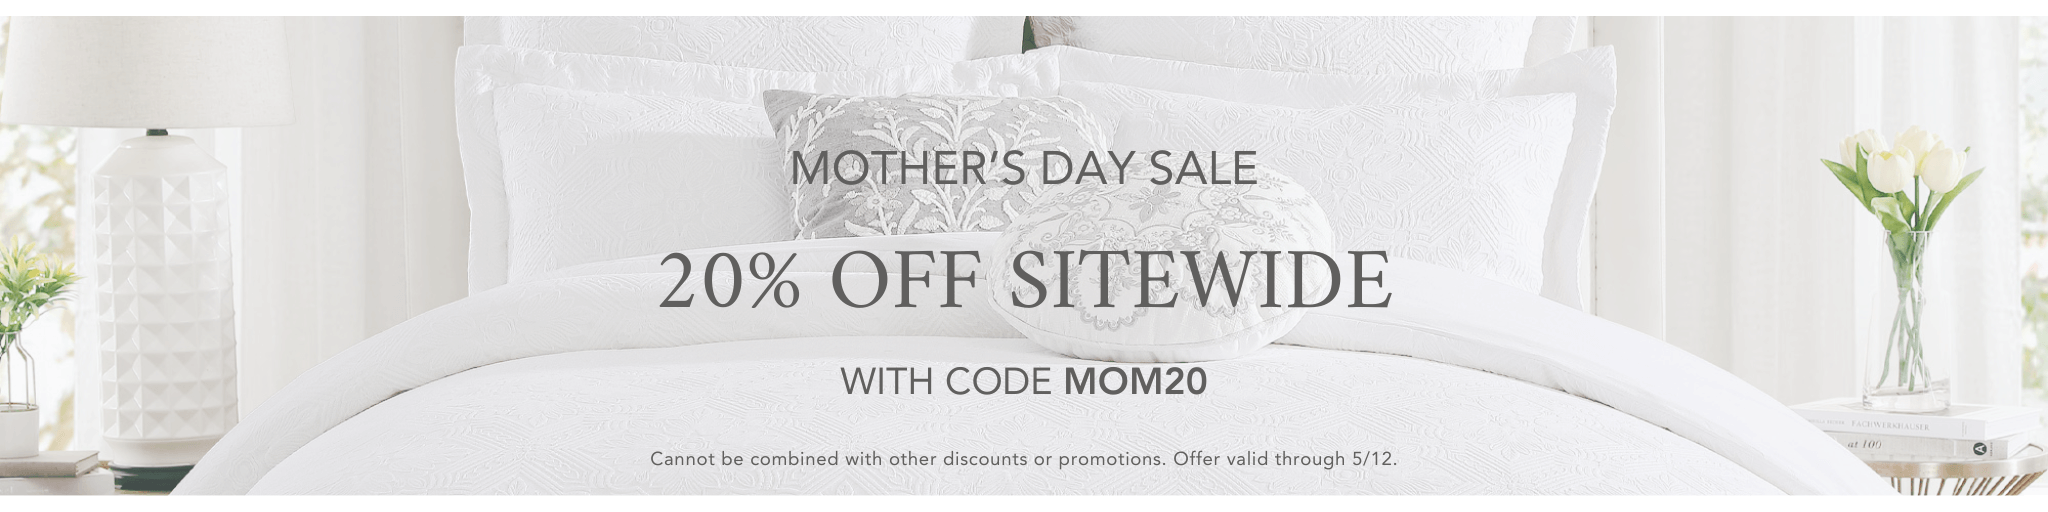 Mother's Day Sale: 20% Off Sitewide with code MOM20 through 5/12